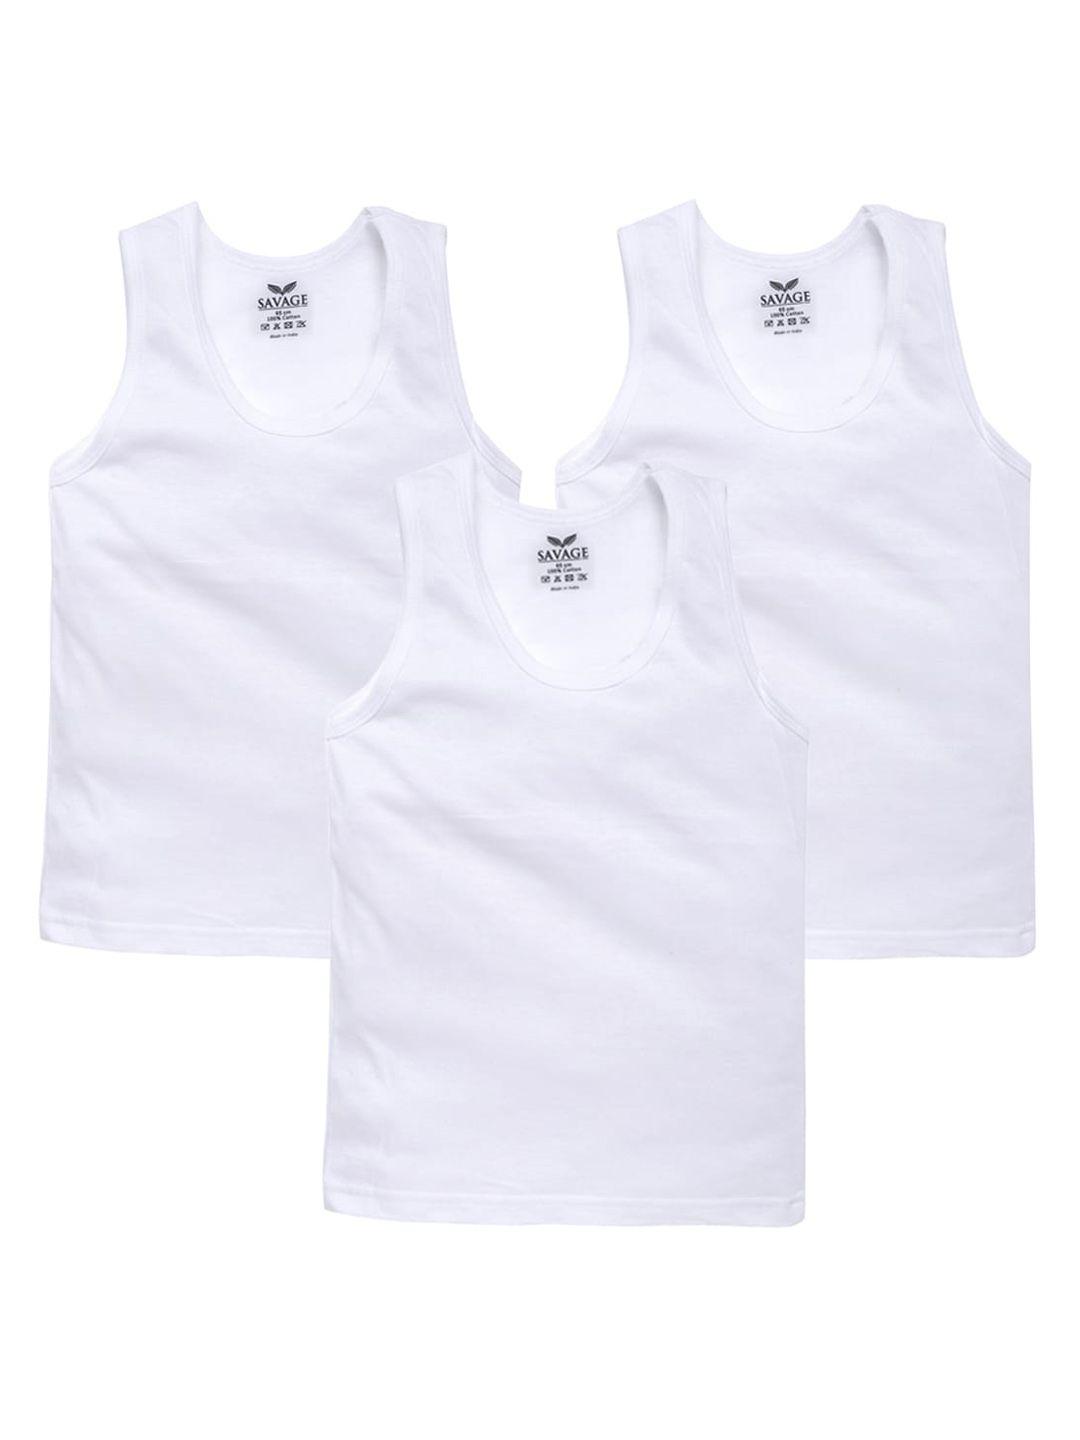 savage-boys-pack-of-3-white-solid-cotton-innerwear-vests